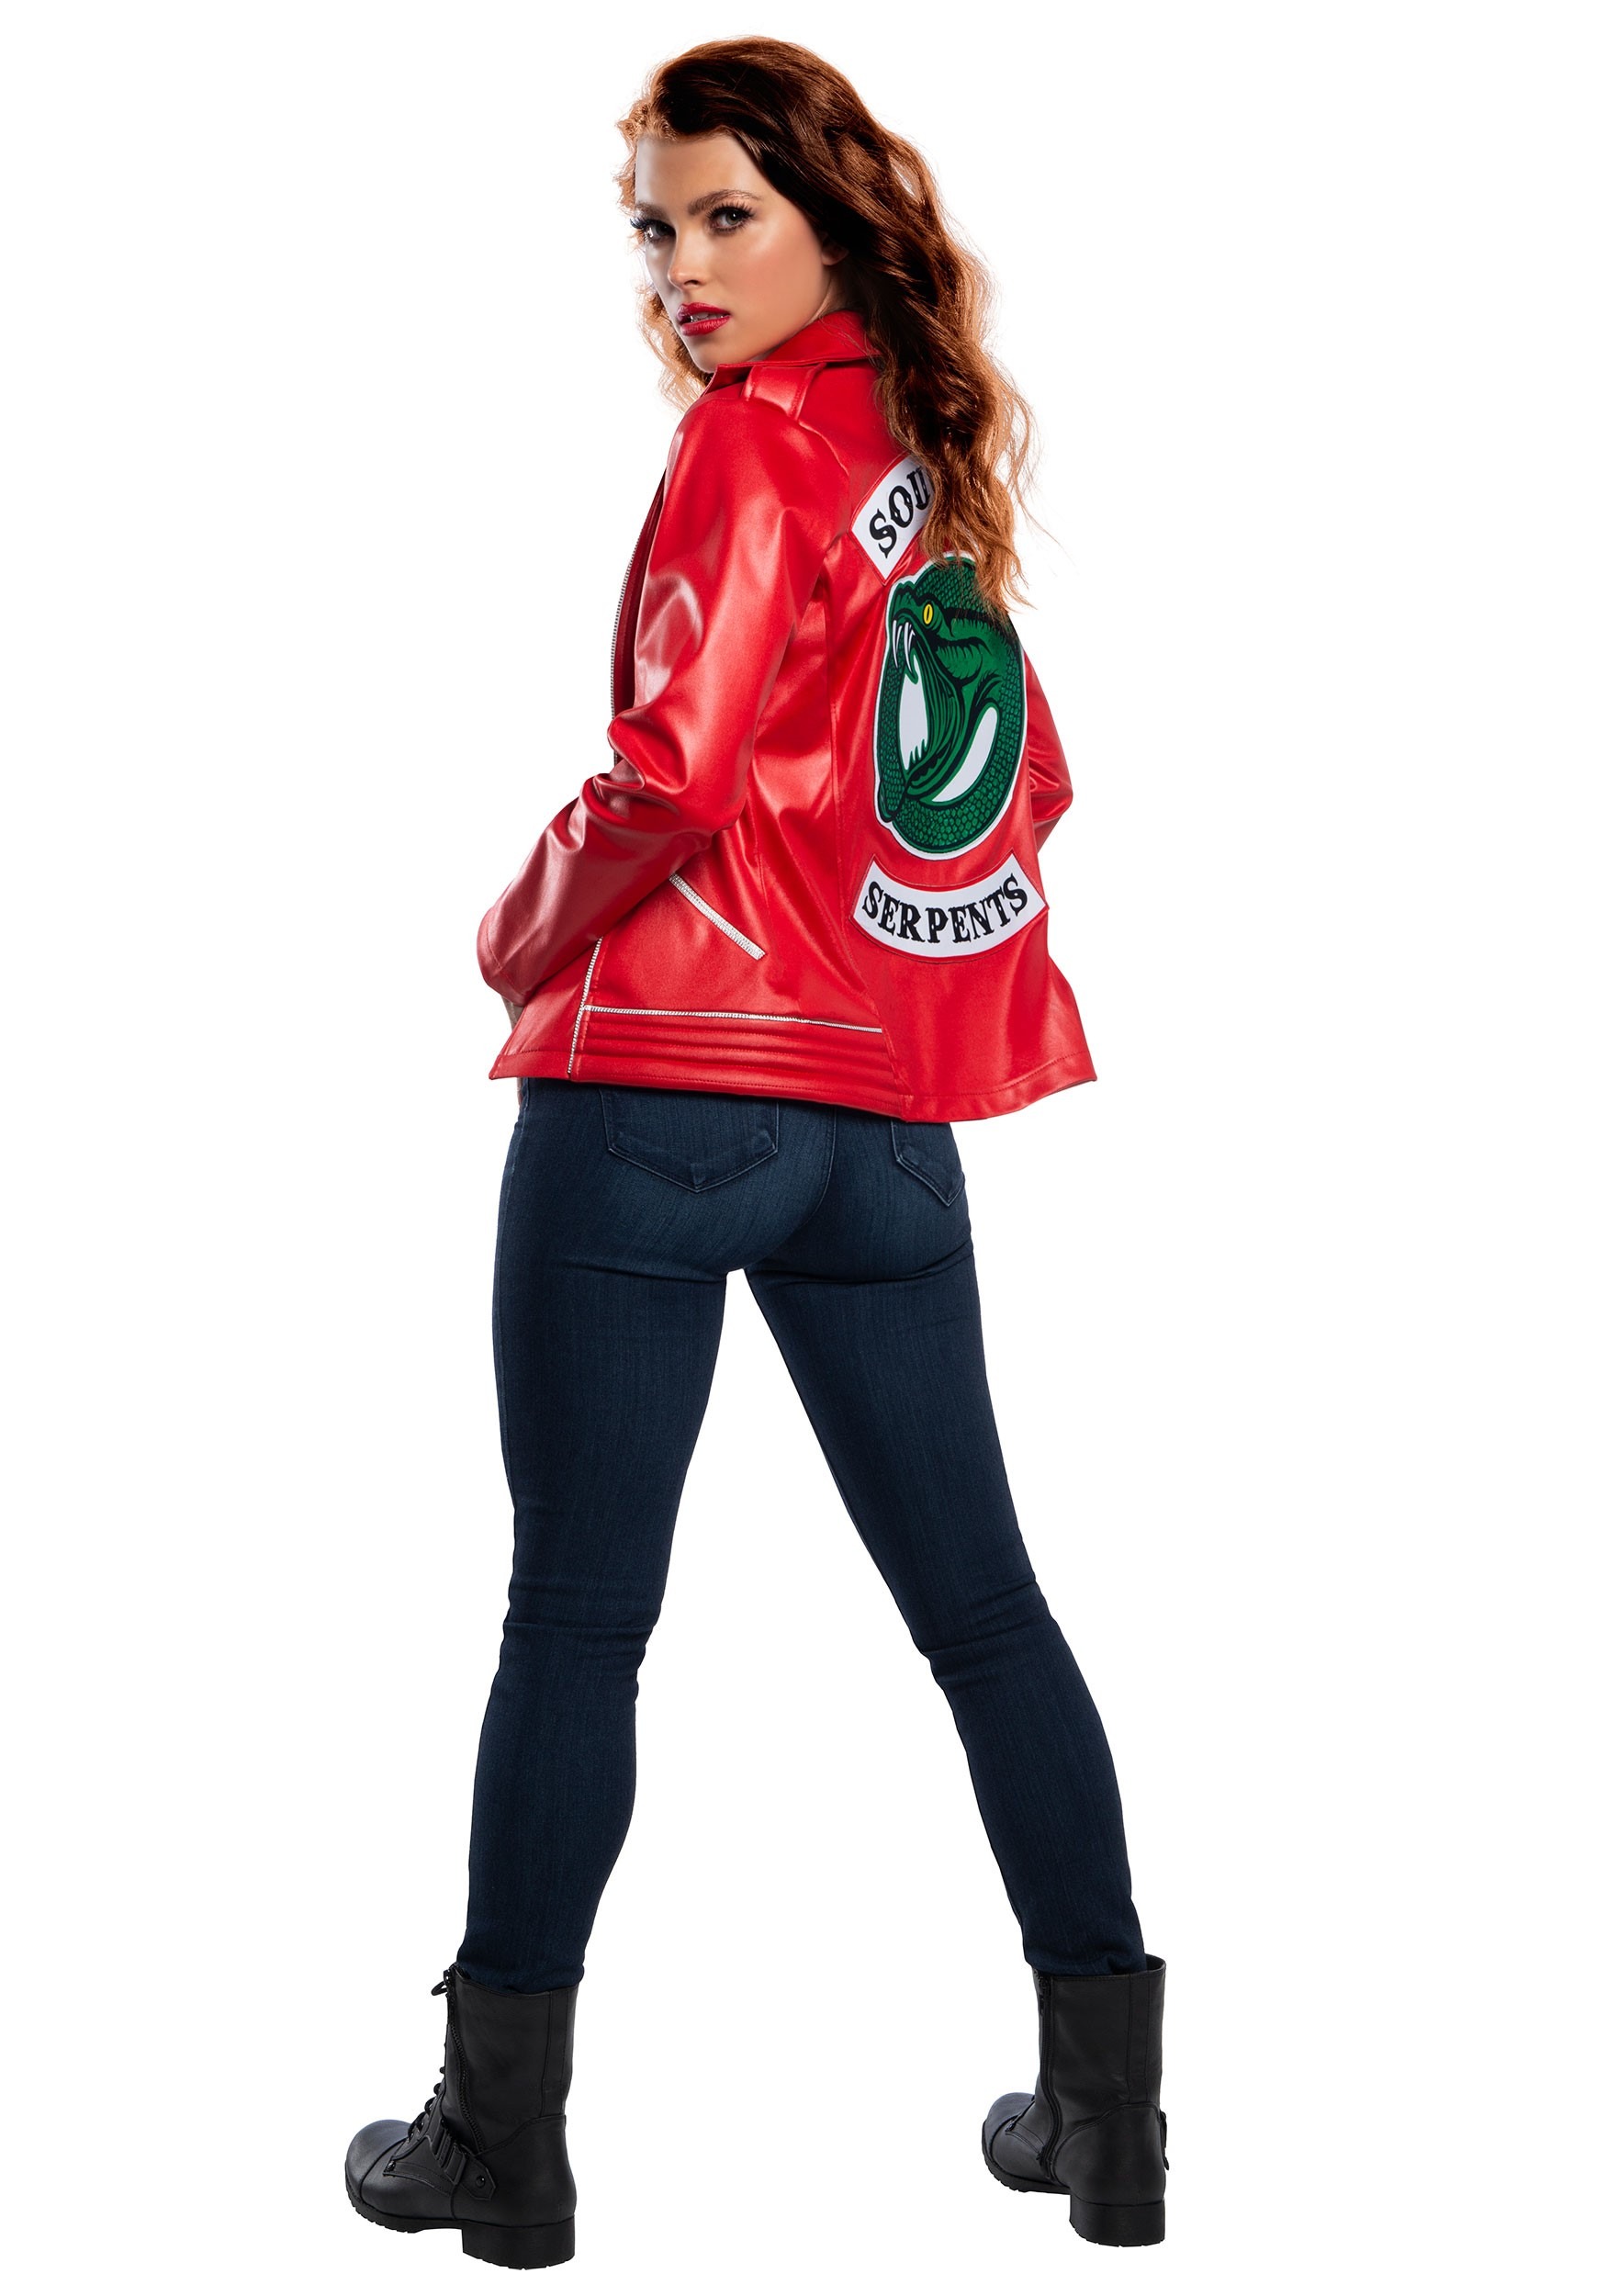 Riverdale Cherry Serpent Jacket for